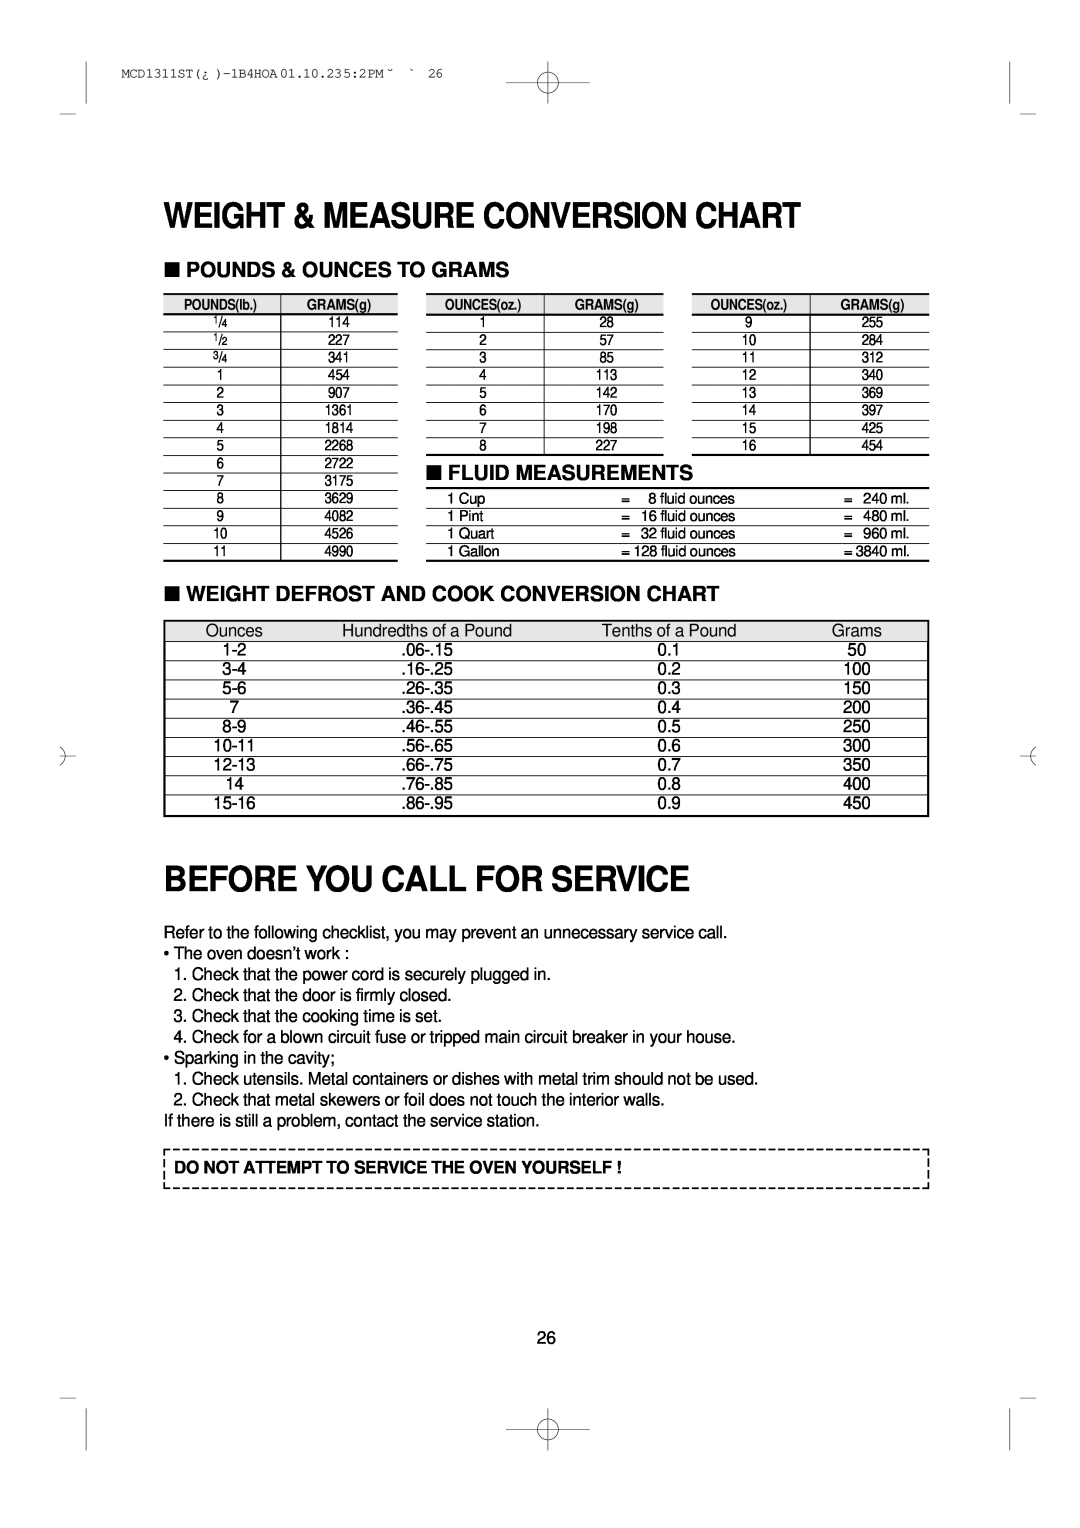 Magic Chef MCD1311ST manual Weight & Measure Conversion Chart, Before You Call For Service, Pounds & Ounces To Grams 